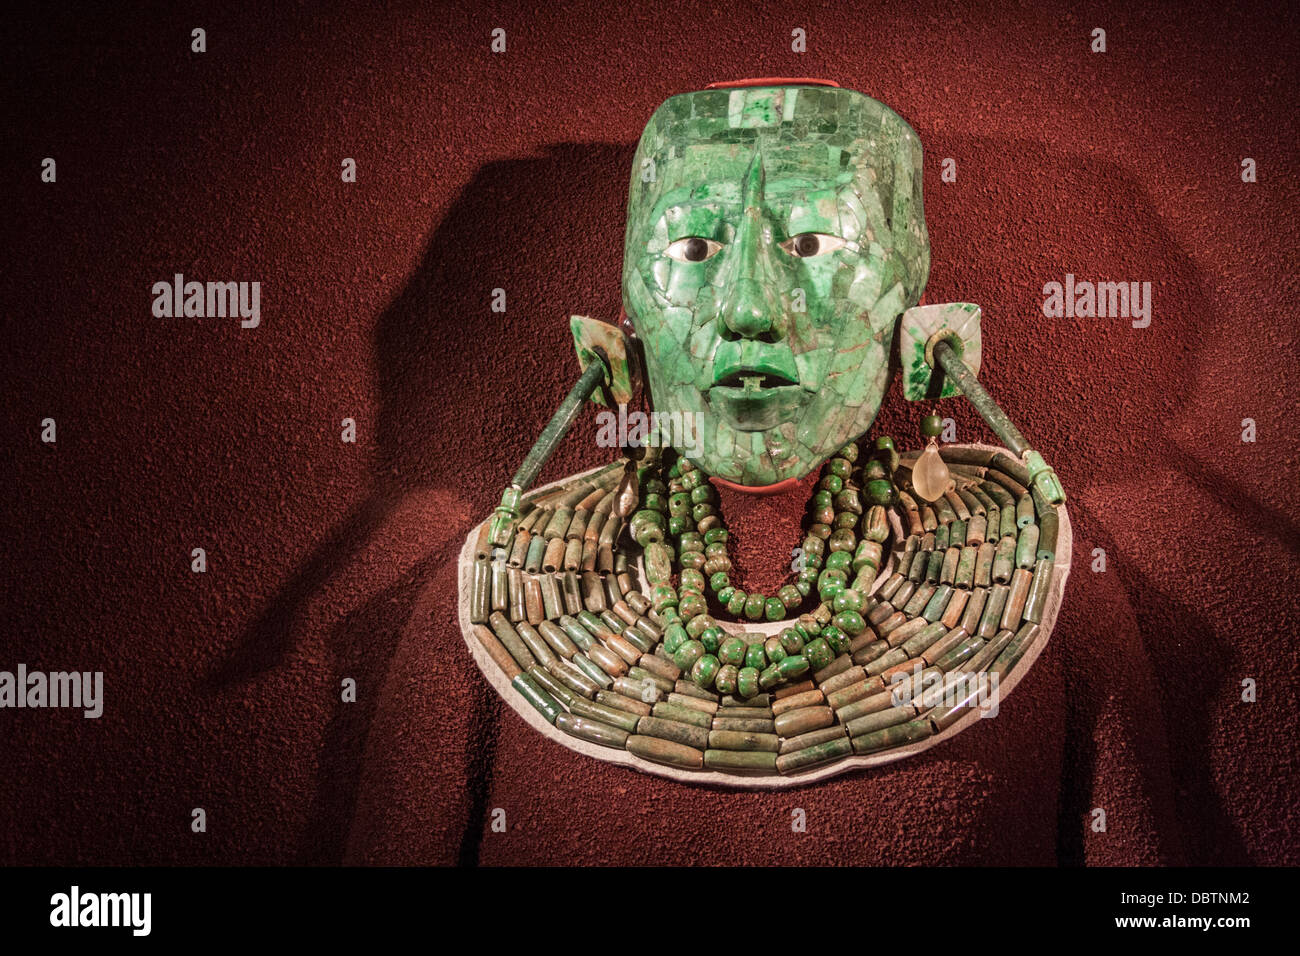 Aztec and Mayan Culture Stock Photo